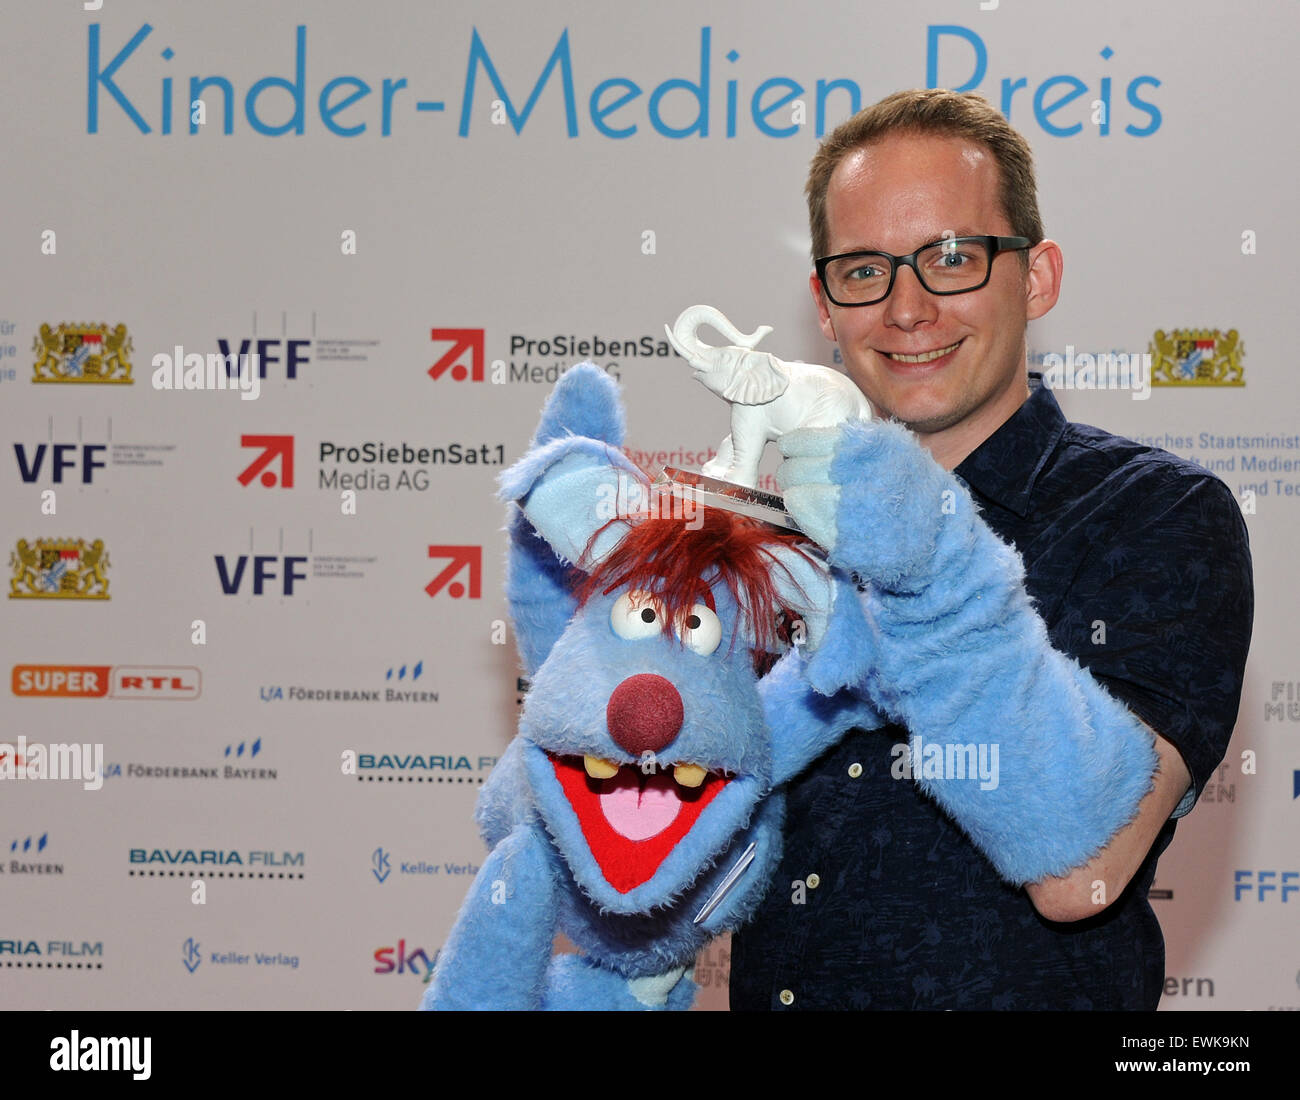 Munich, Germany. 28th June, 2015. Puppeteer Martin Reinl with the puppet Woozle rejoices over his trophy at the ceremony for the Children's Media Award 'The White Elephant' at the Munich Film Festival in Munich, Germany, 28 June 2015. Reinl received the award for 'Best TV Format' for the show 'Woozle Goozle.' Photo: Ursula Dueren/dpa/Alamy Live News Stock Photo